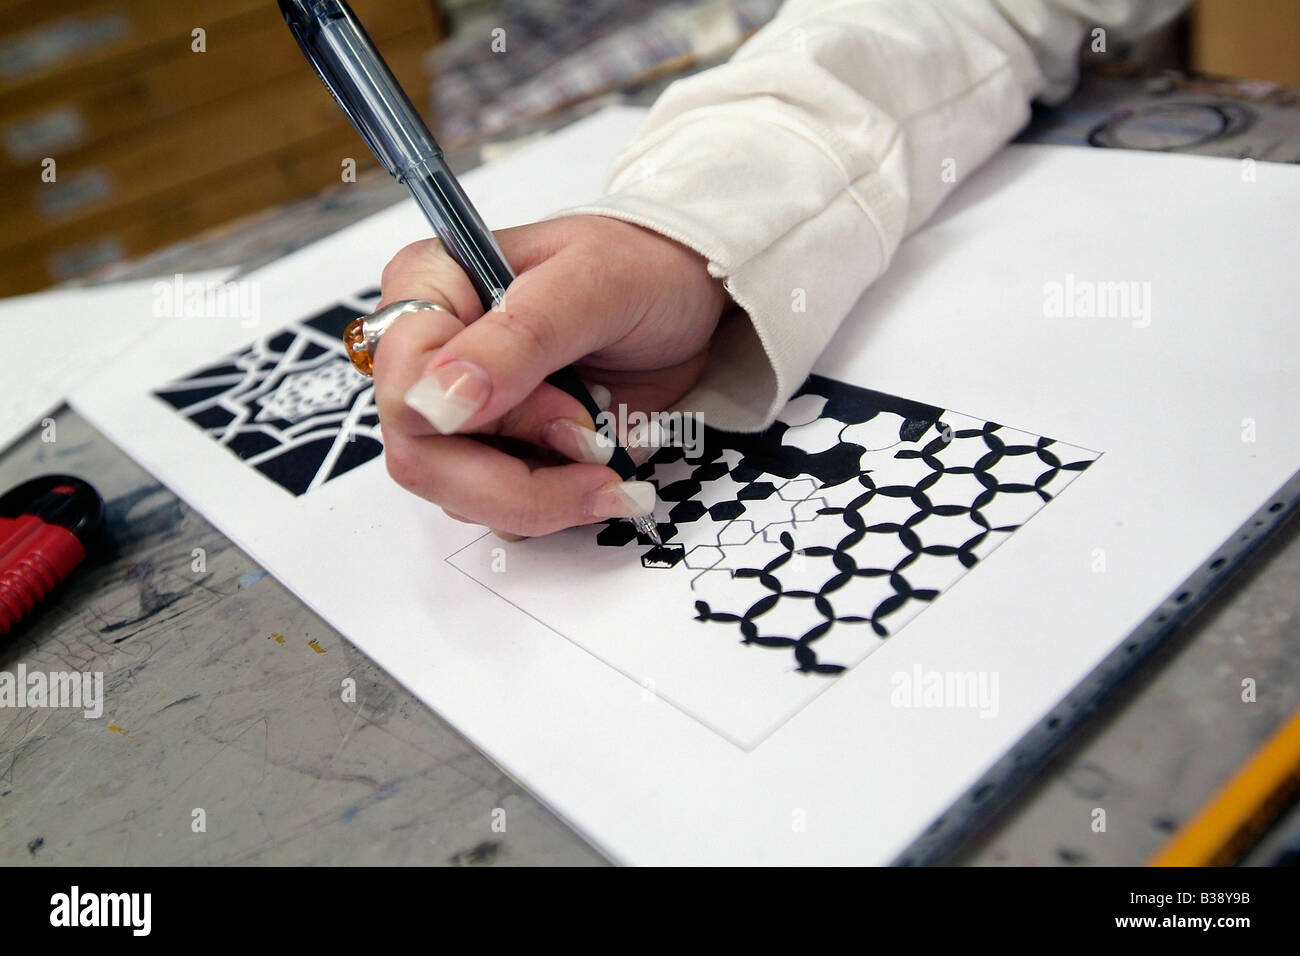 Close-up of female art student's hand drawing a symmetrical design in black ink Stock Photo